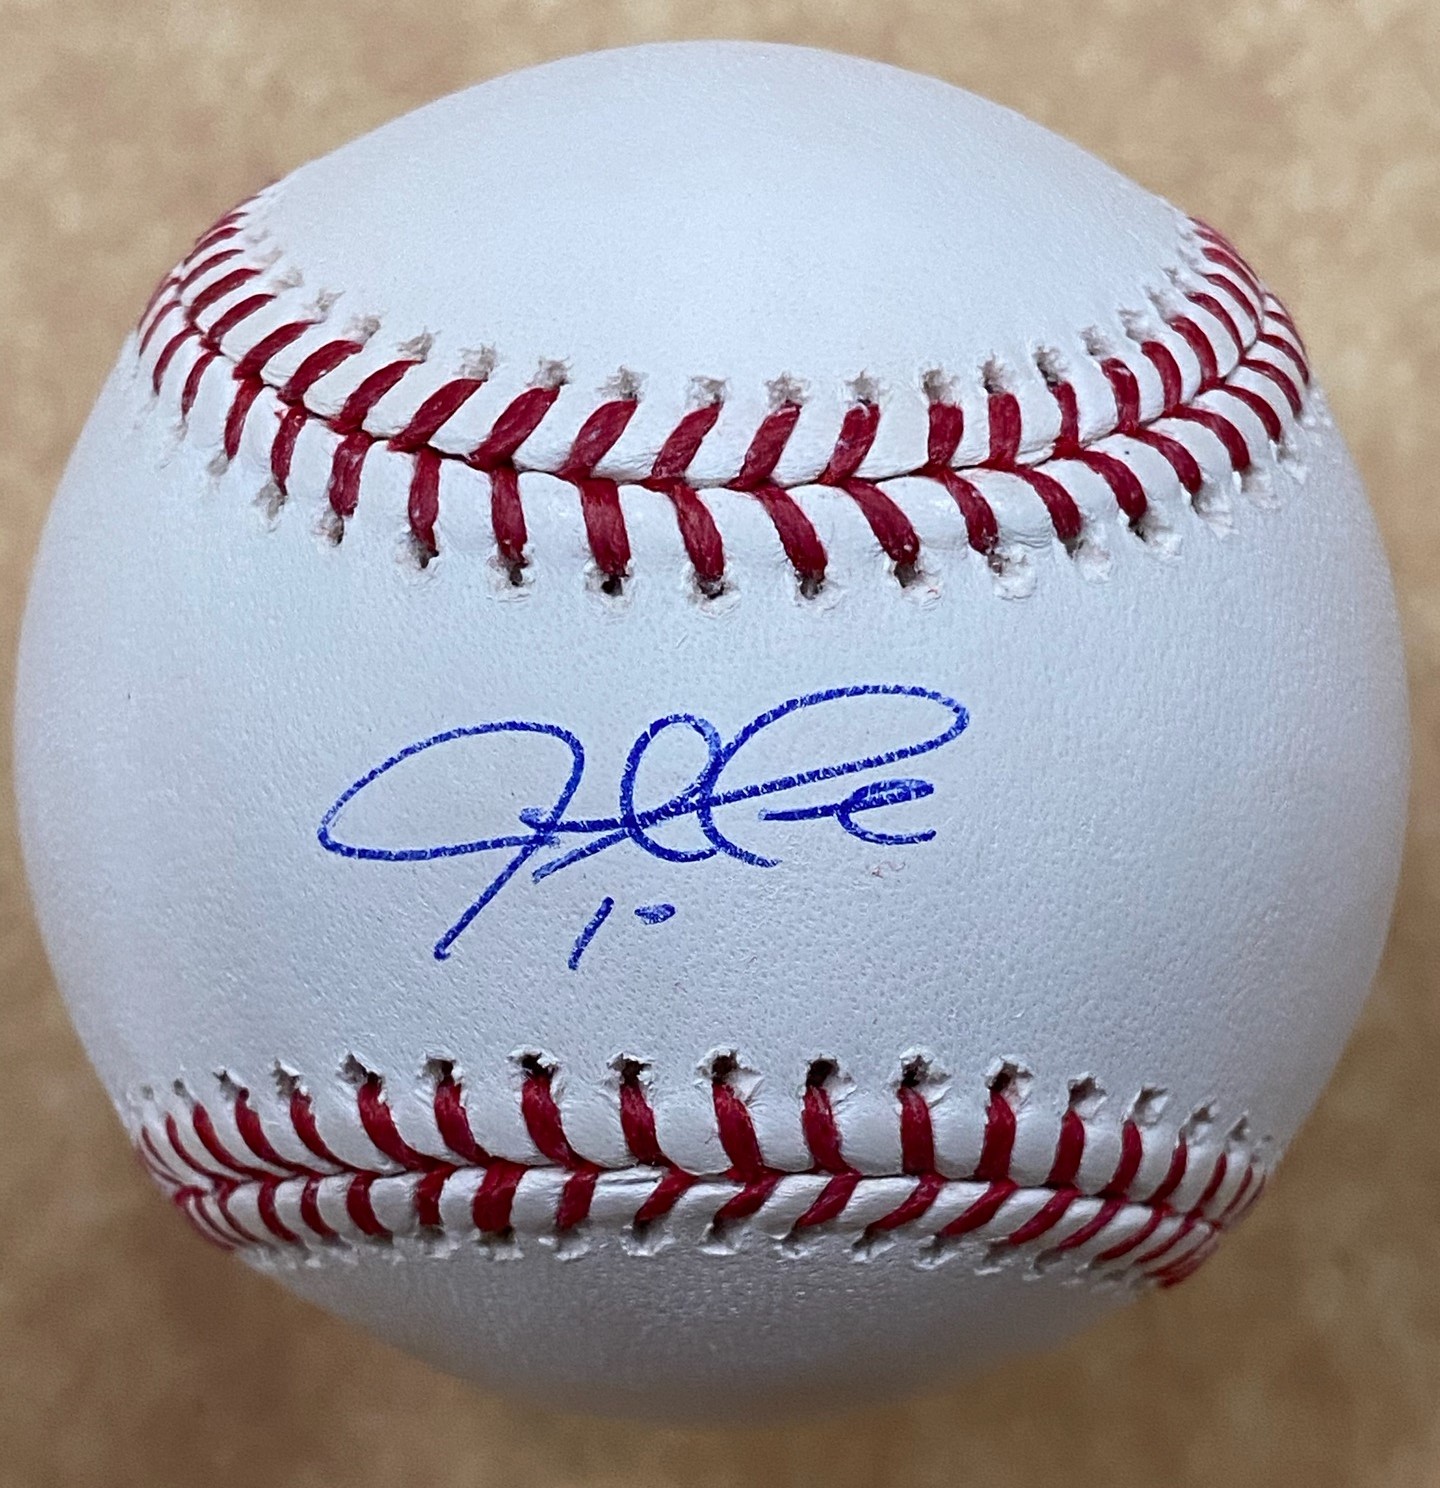 UN-USED Justin Turner Signed Baseball for Sale in Weymouth, MA - OfferUp